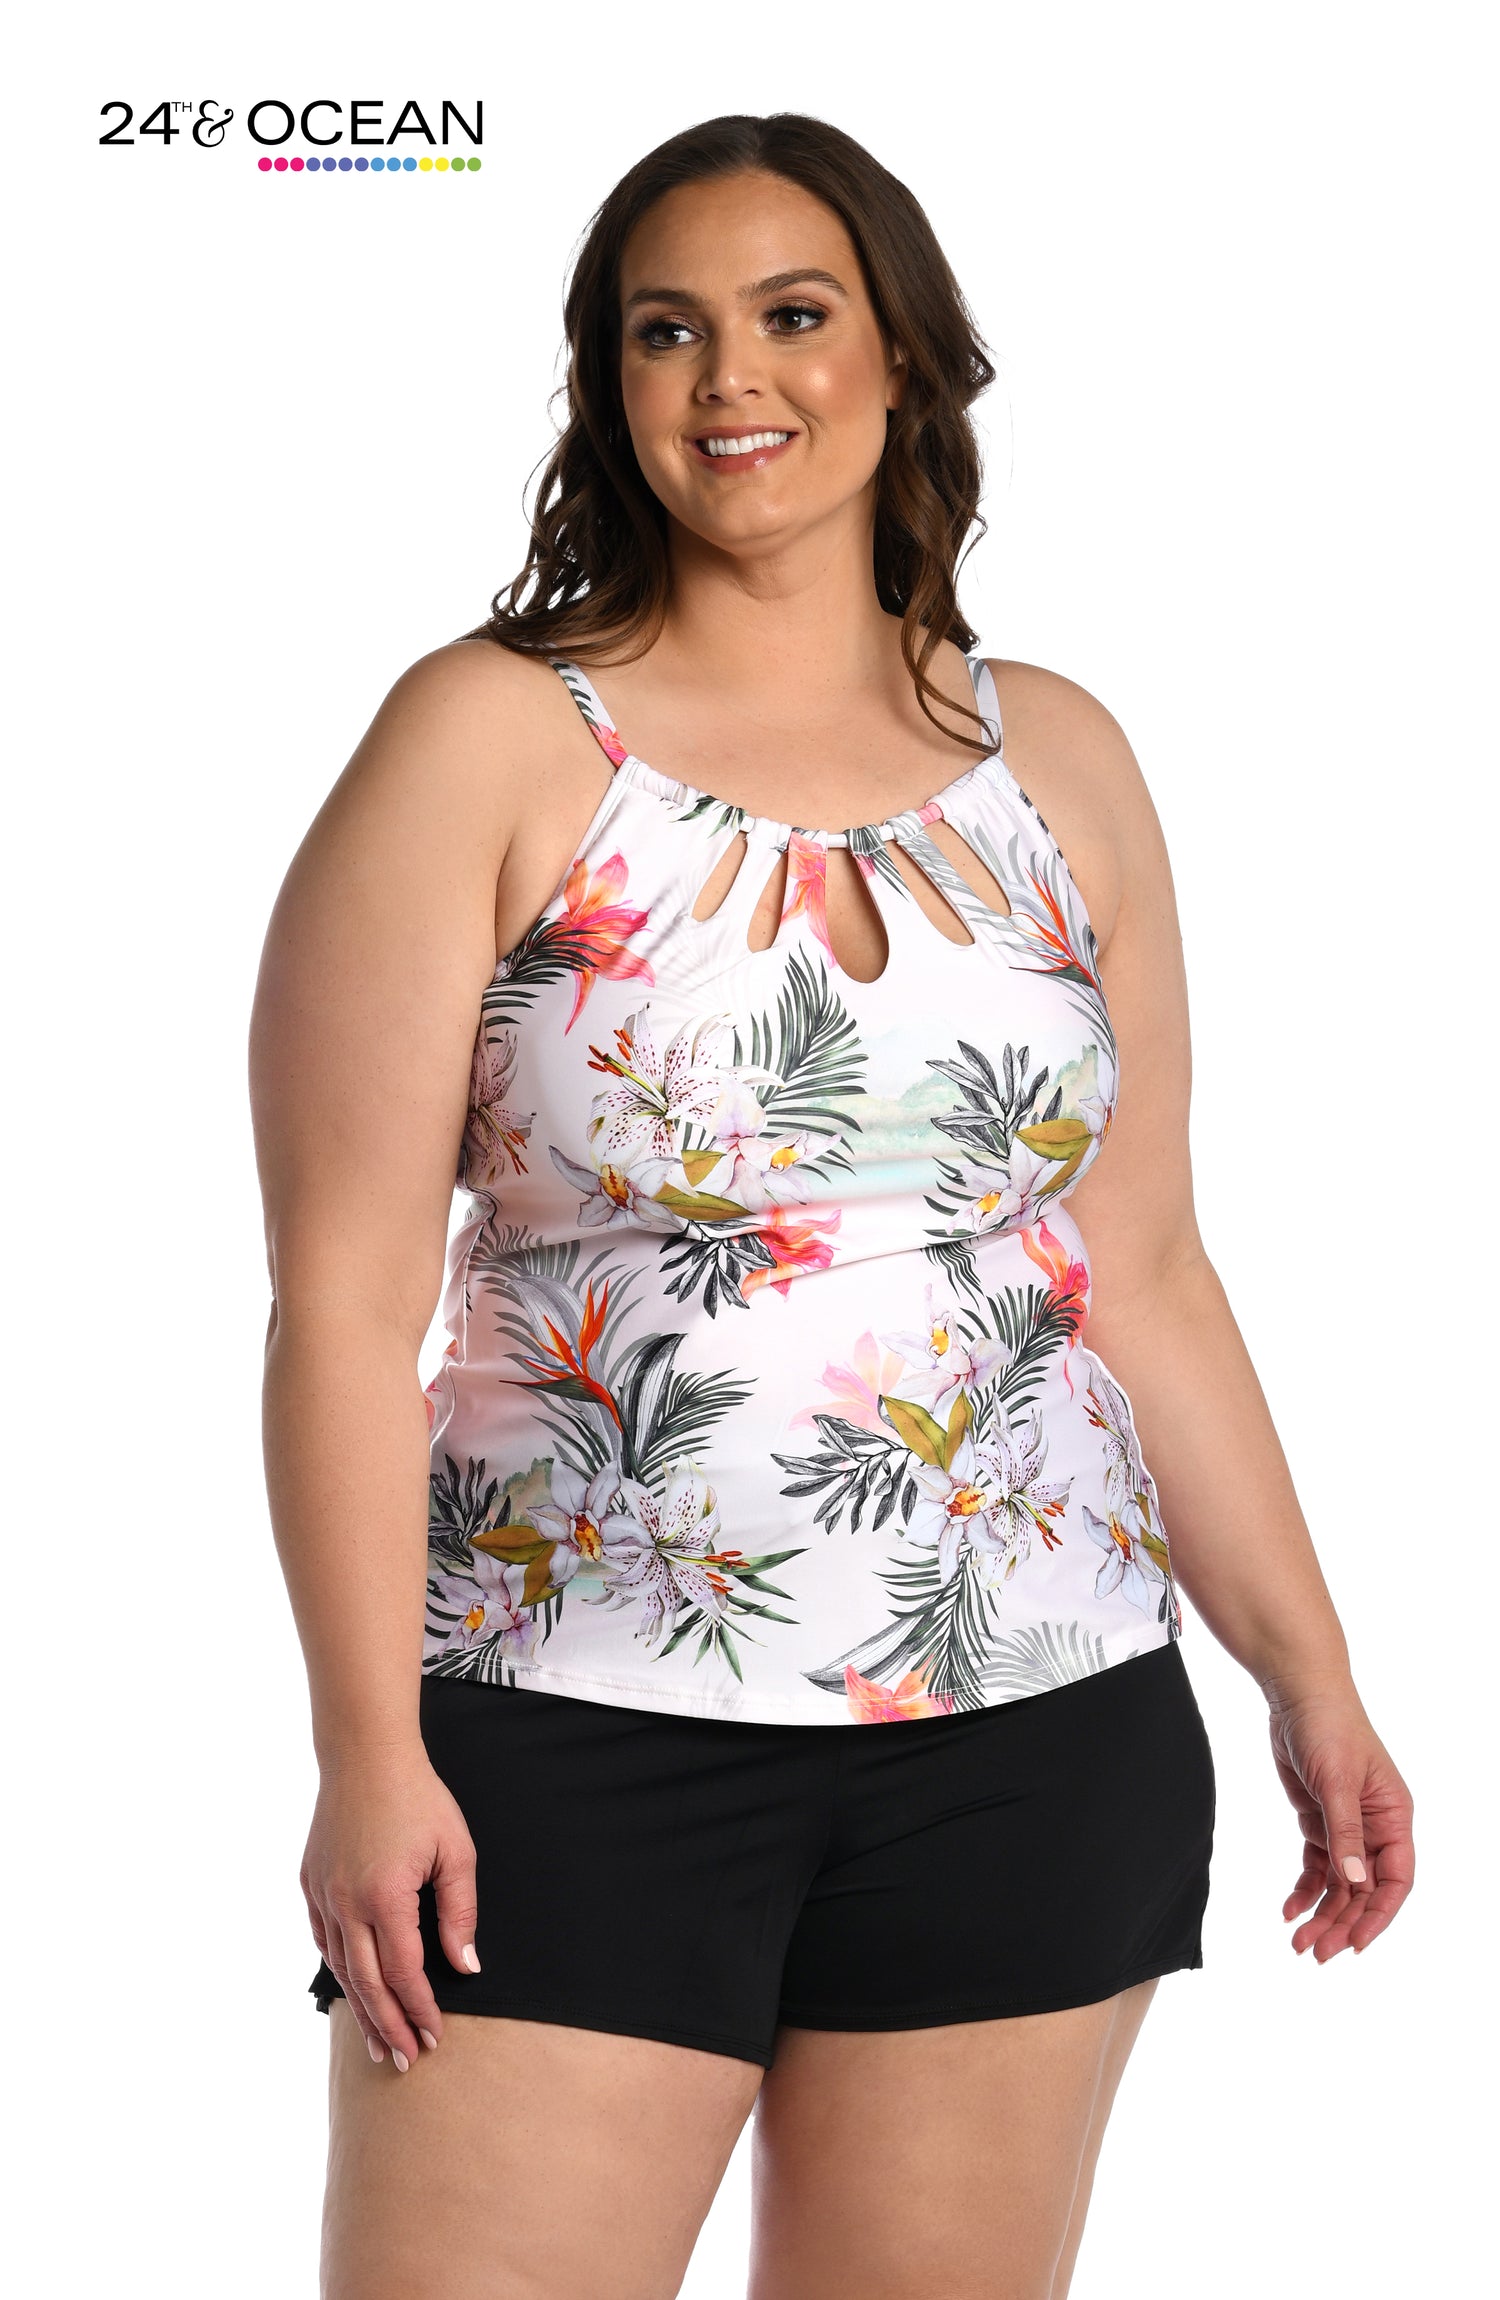 Model is wearing a white multi colored tropical printed high neck tankini top from our Tahiti Skies collection!